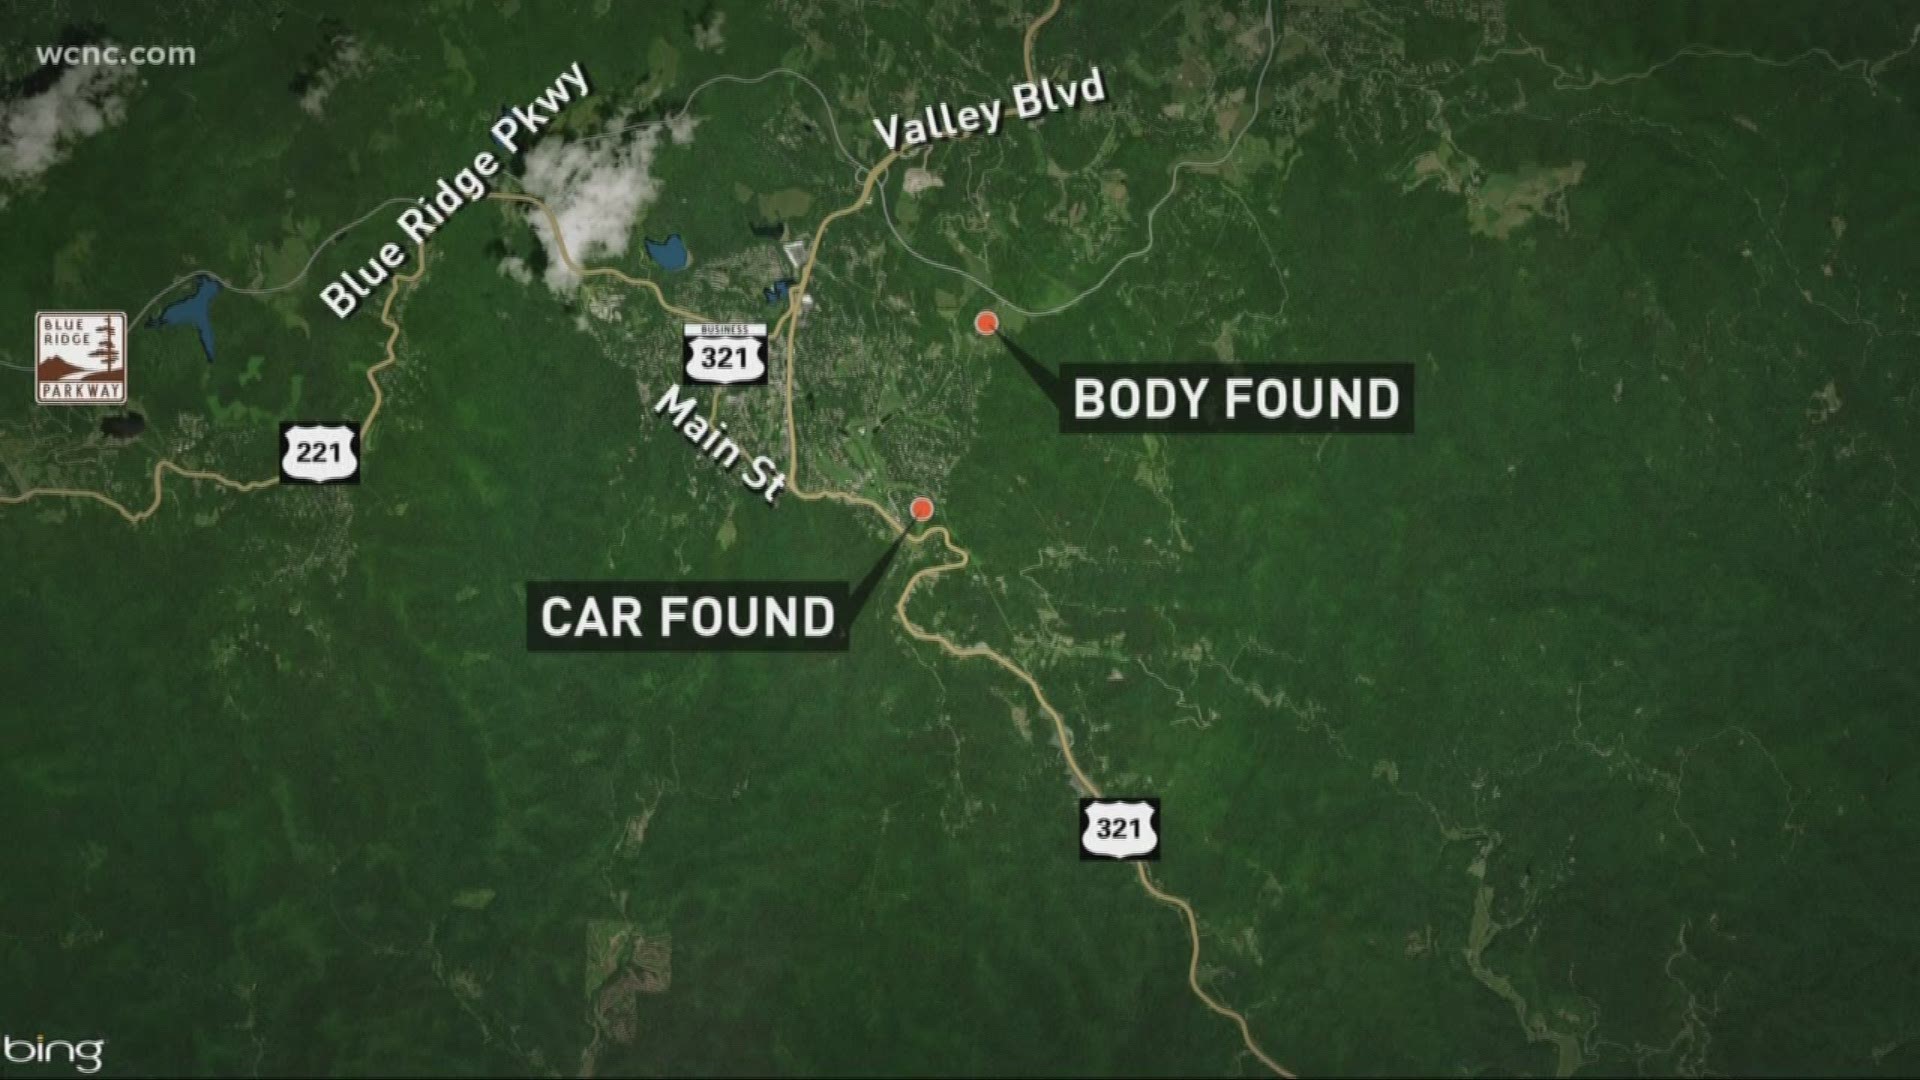 Police found the car they believe Milton J. Hayes was driving, just a quarter of a mile from where they found his body.